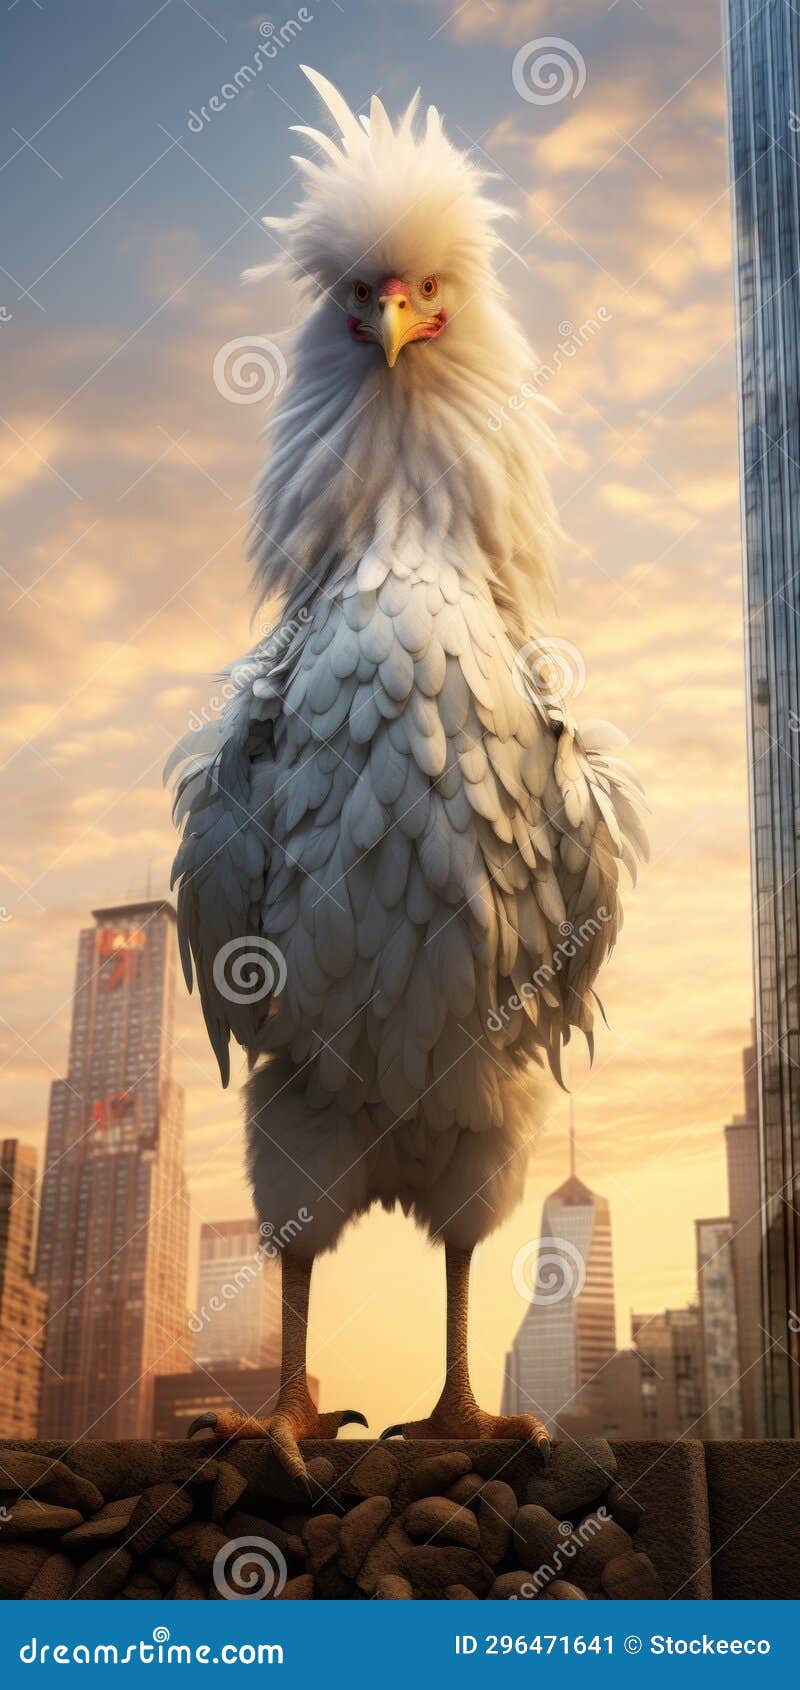 guardian of the twin towers: photorealistic owl art with caninecore aesthetic